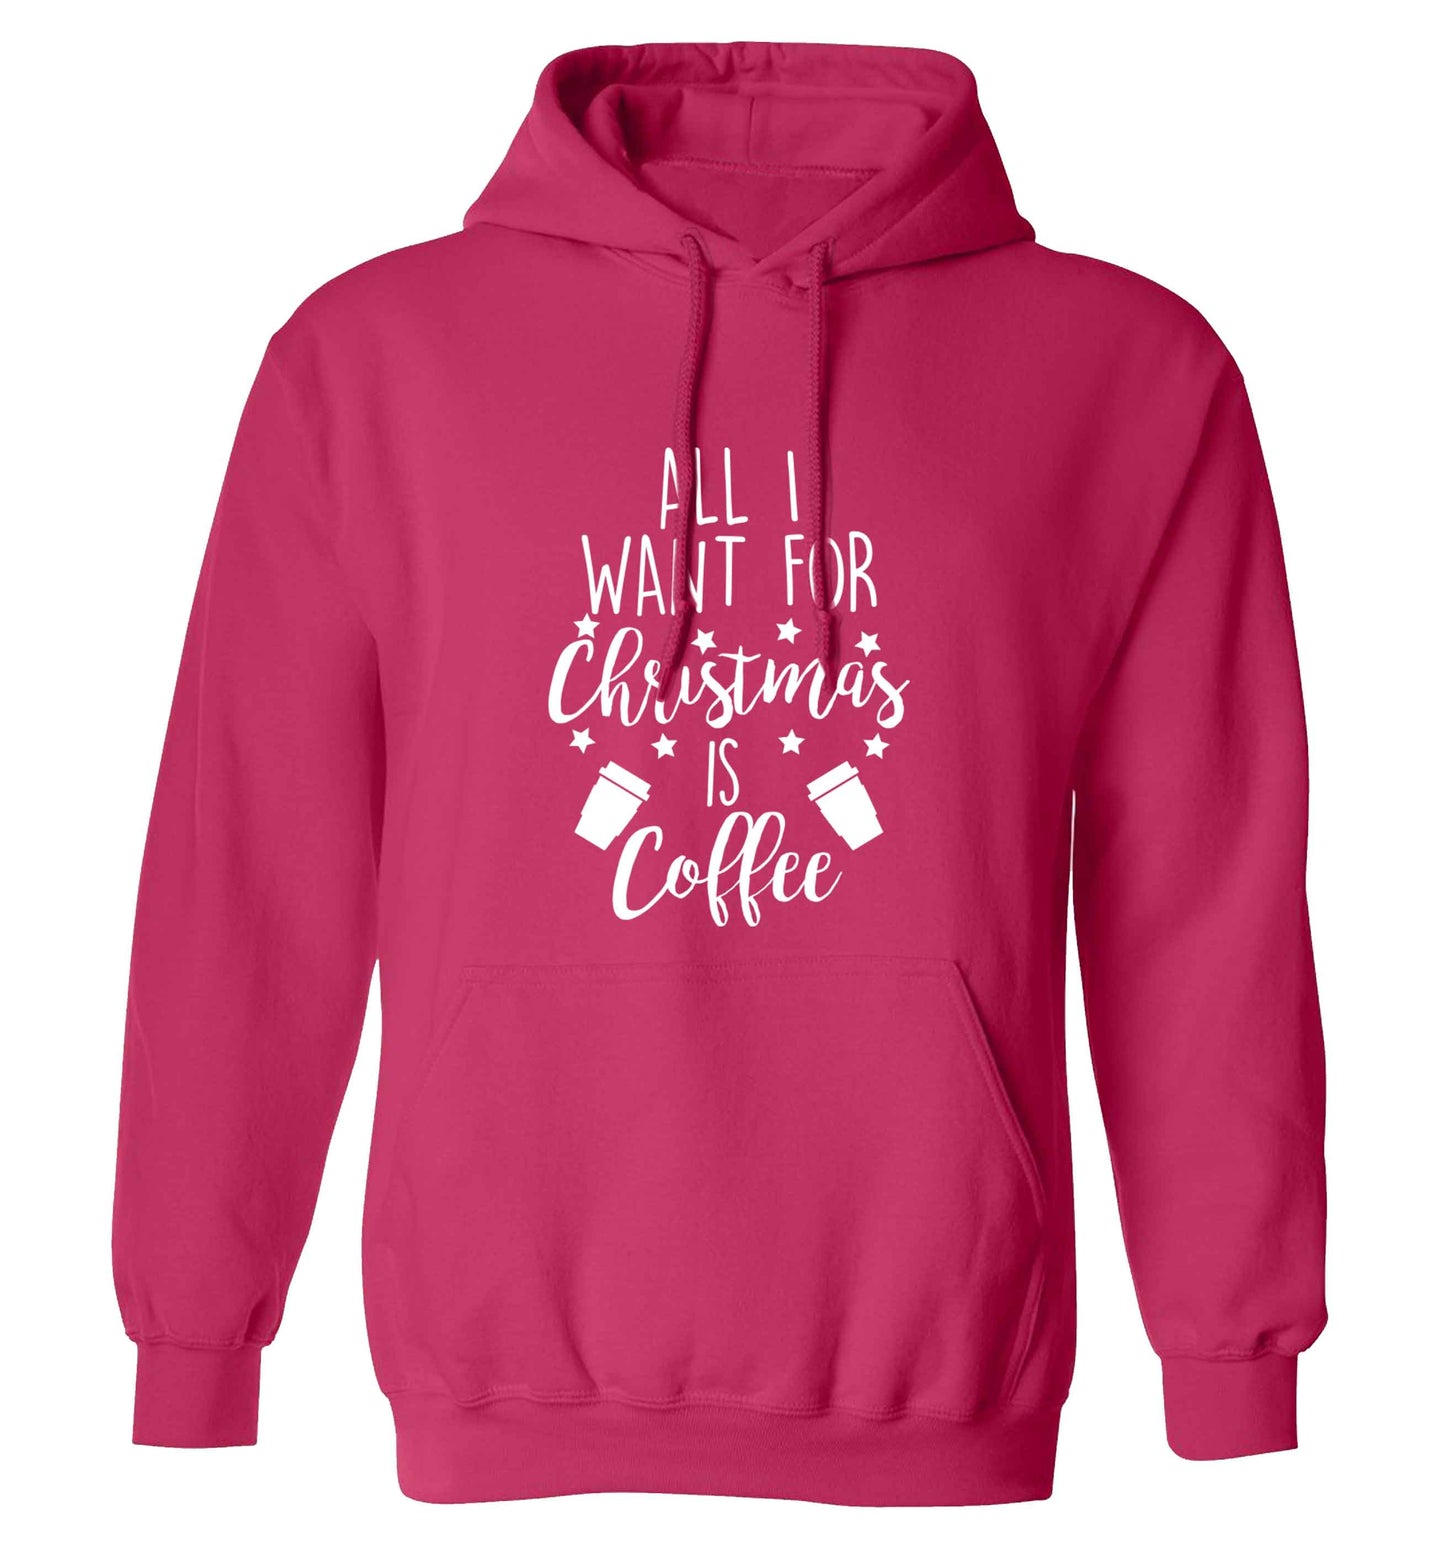 All I want for Christmas is coffee adults unisex pink hoodie 2XL